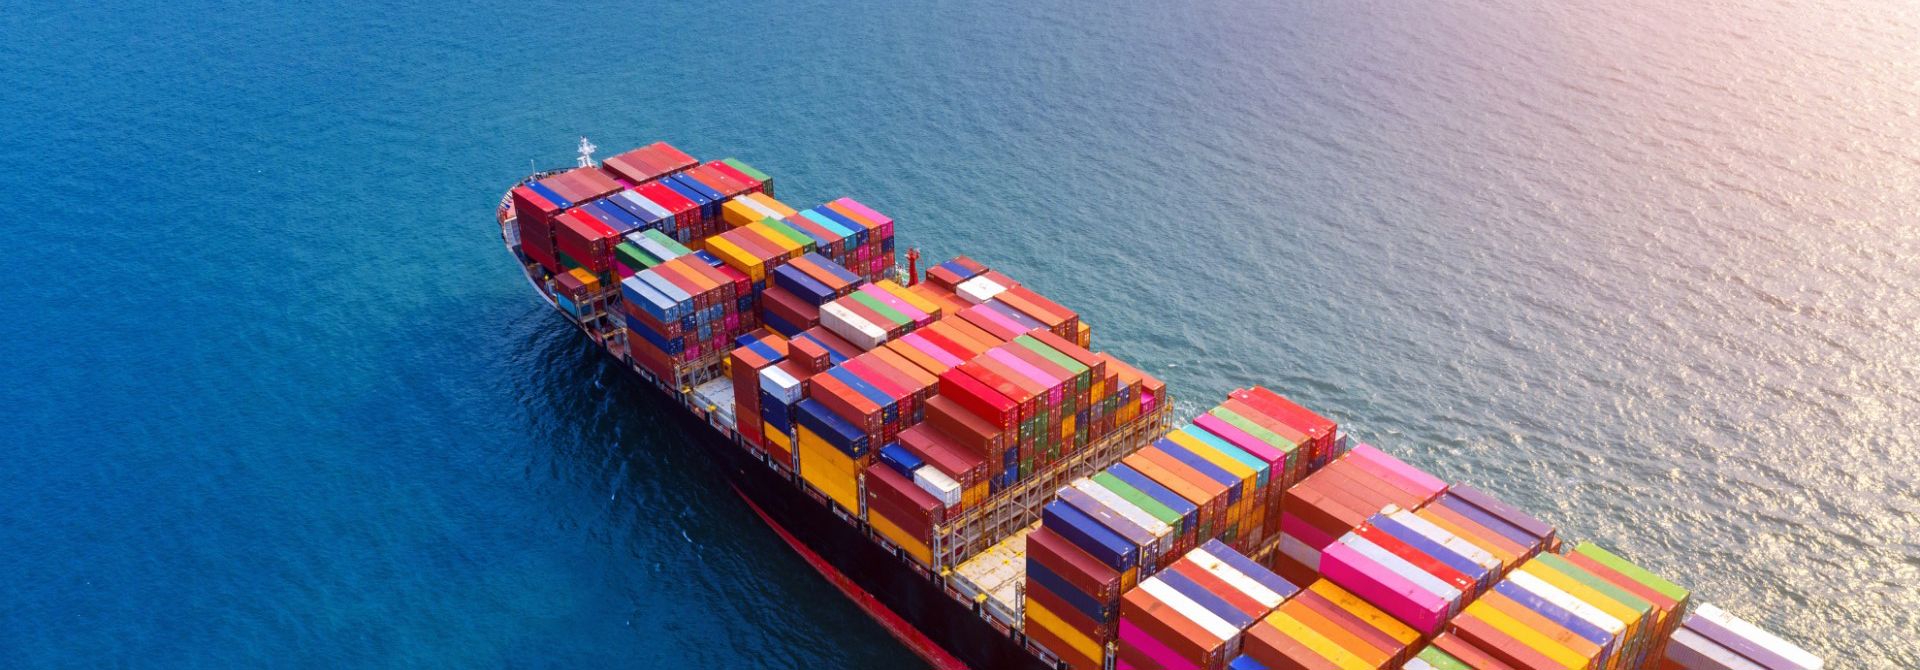 Colourful shipping containers on the water